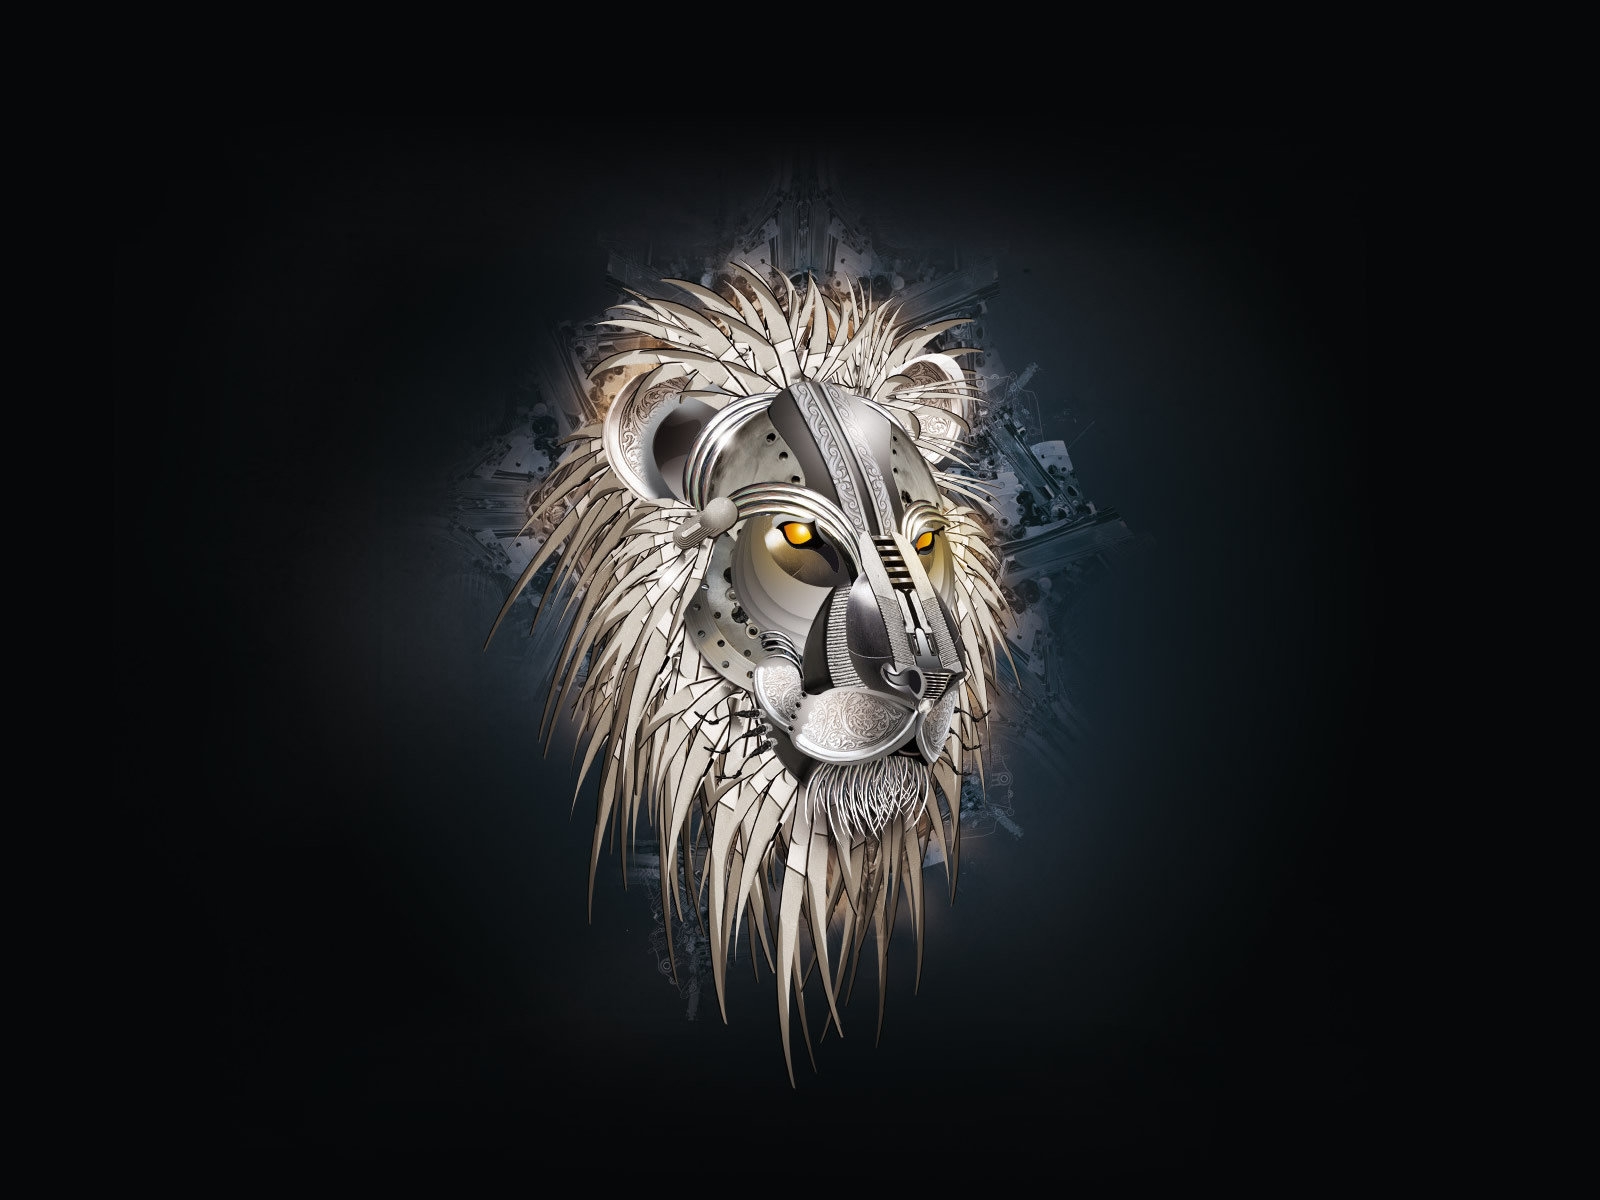 Lion head drawing for 1600 x 1200 resolution